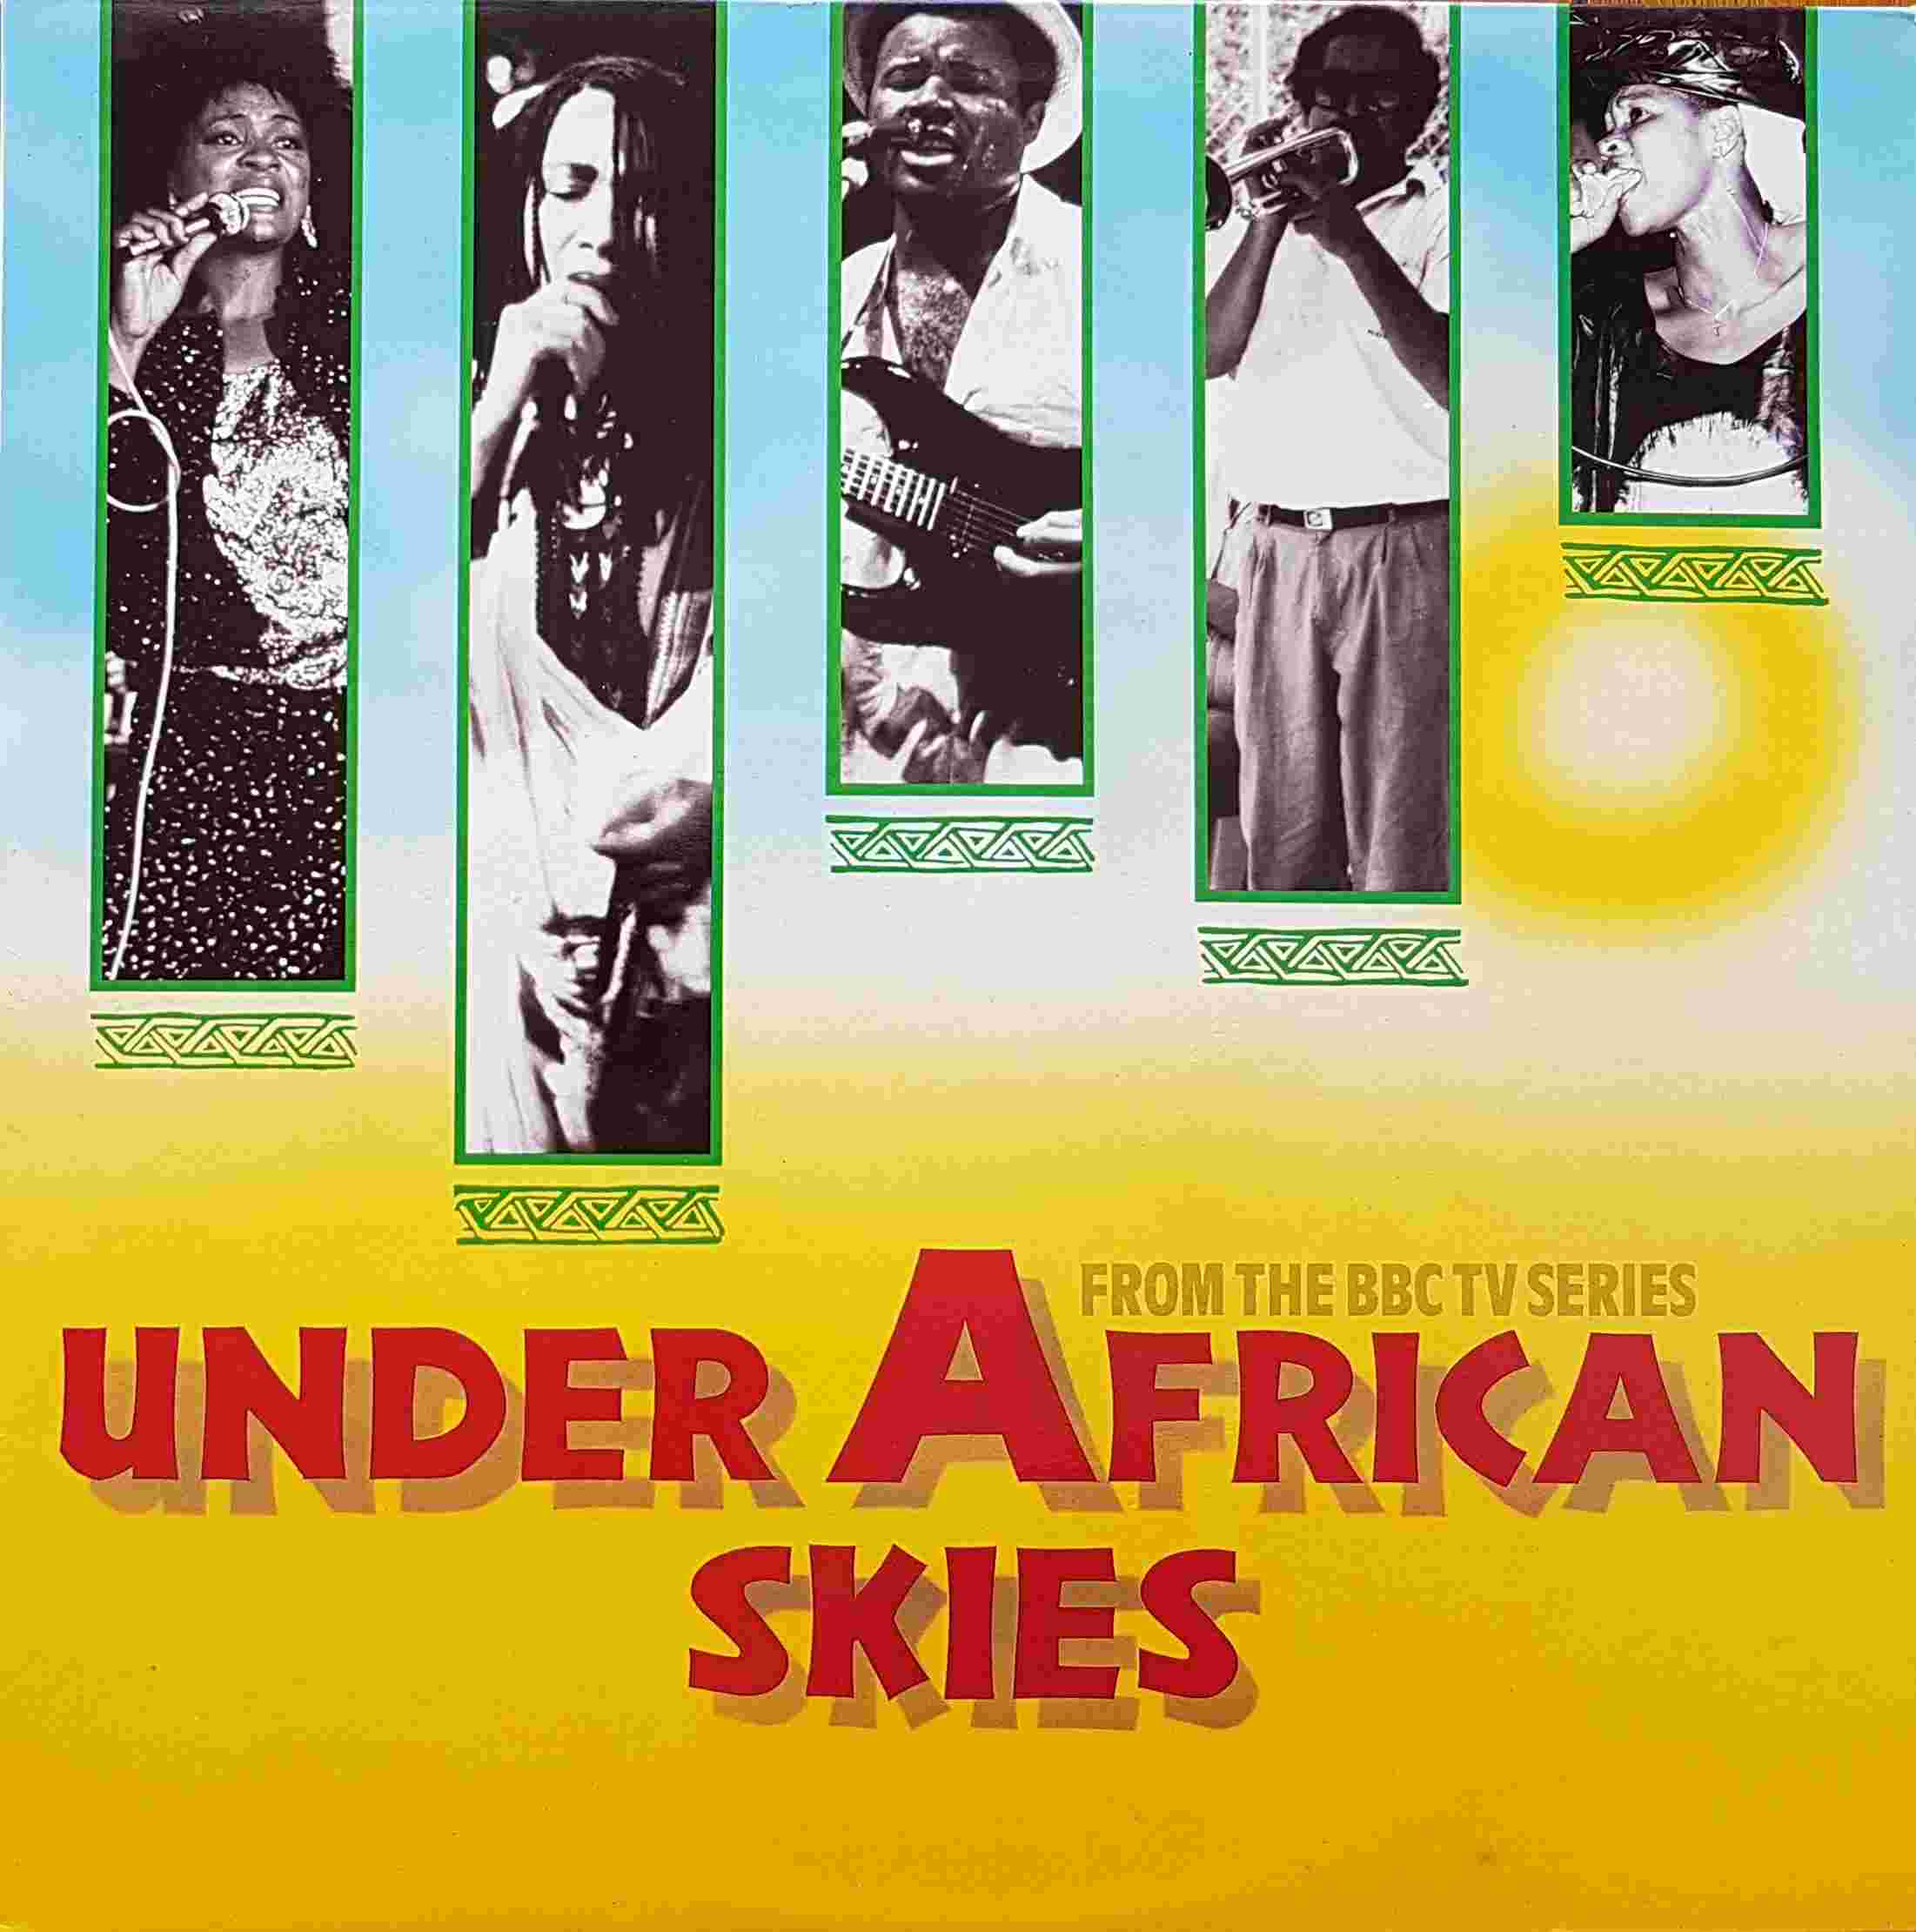 Picture of REQ 745 Under African skies by artist Various from the BBC albums - Records and Tapes library